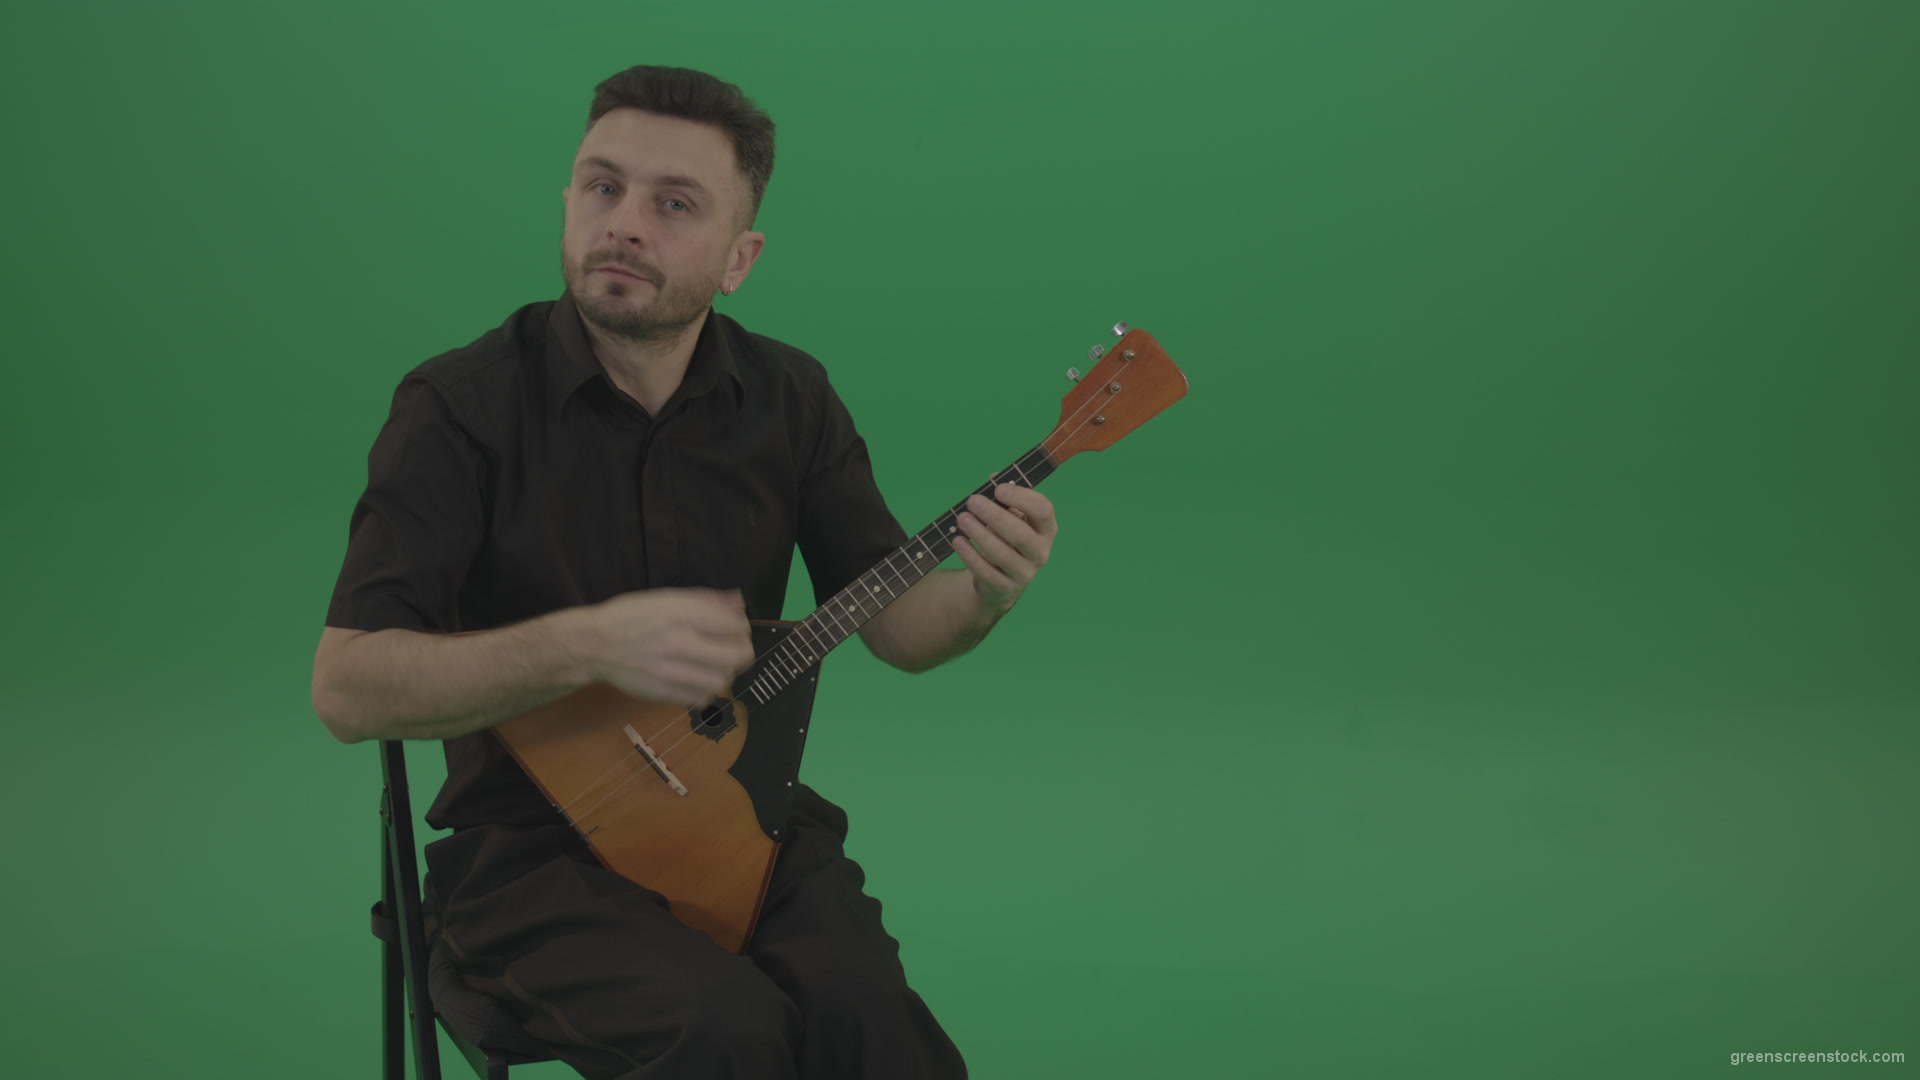 Funny-Balalaika-music-player-in-black-wear-playing-in-wedding-isolated-on-green-screen-background_001 Green Screen Stock